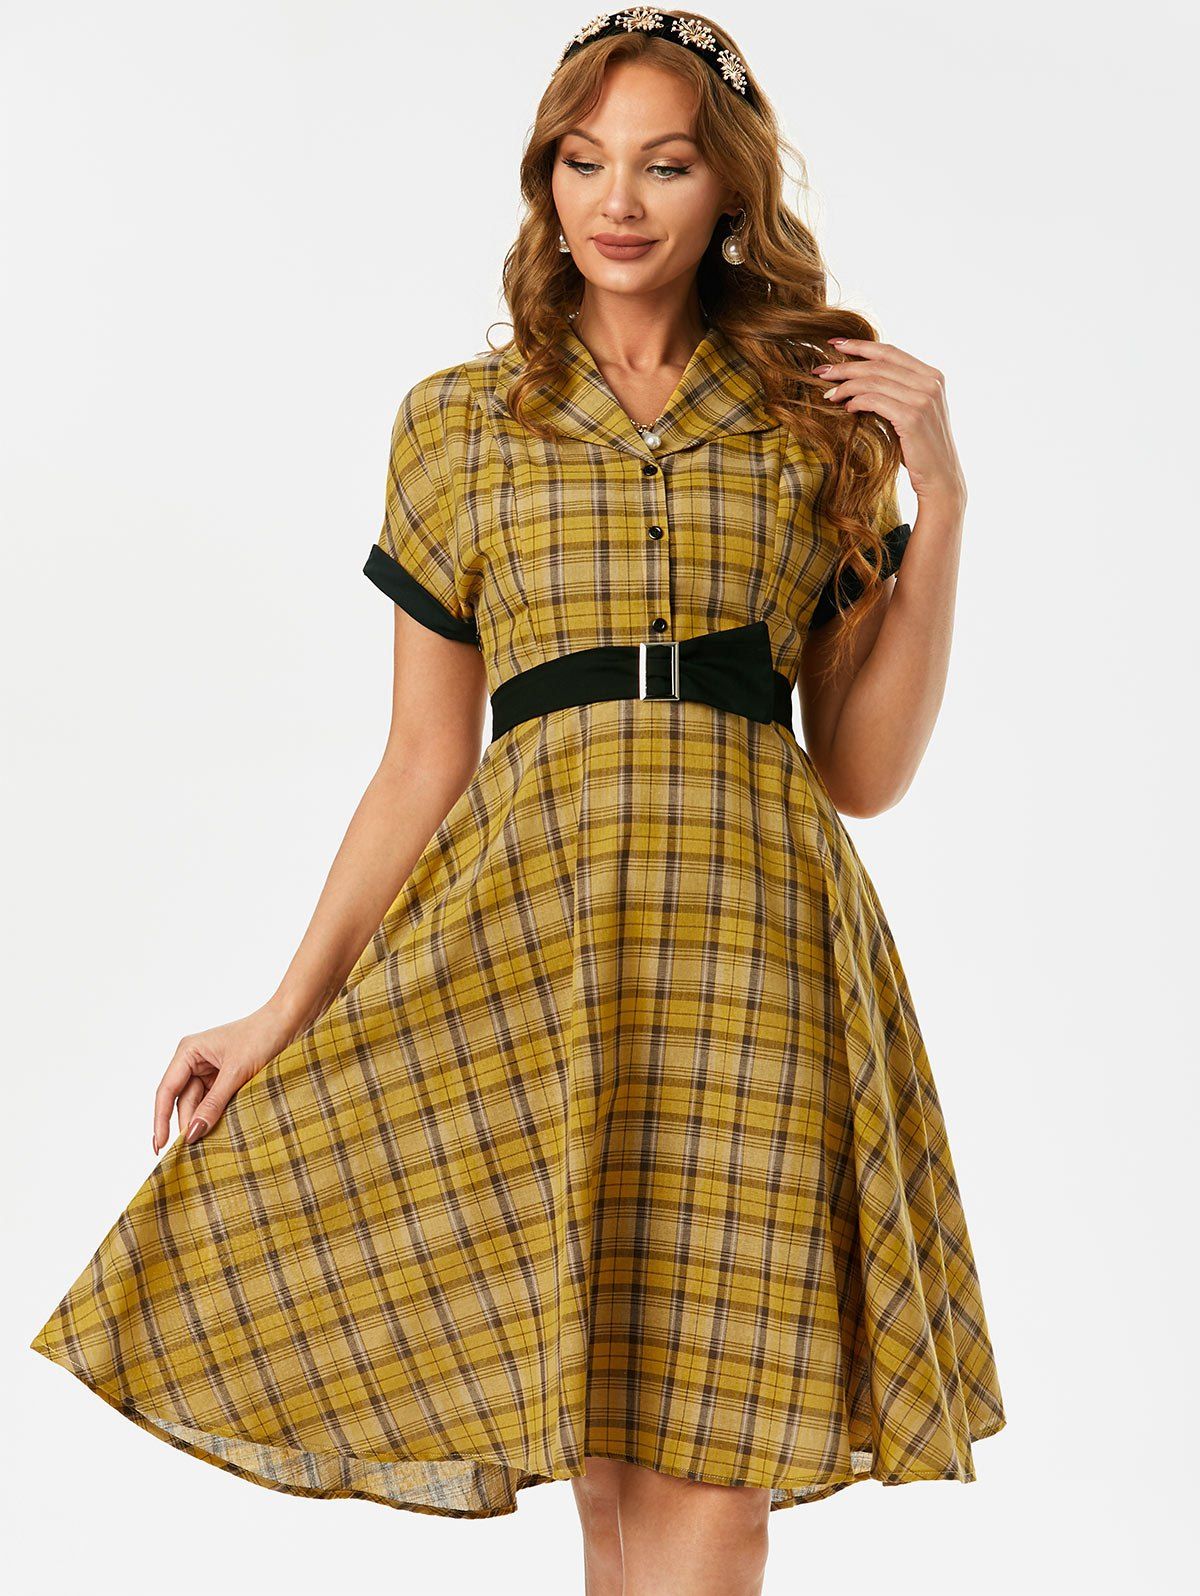 Plaid Button Placket Belted Retro Dress - YELLOW M